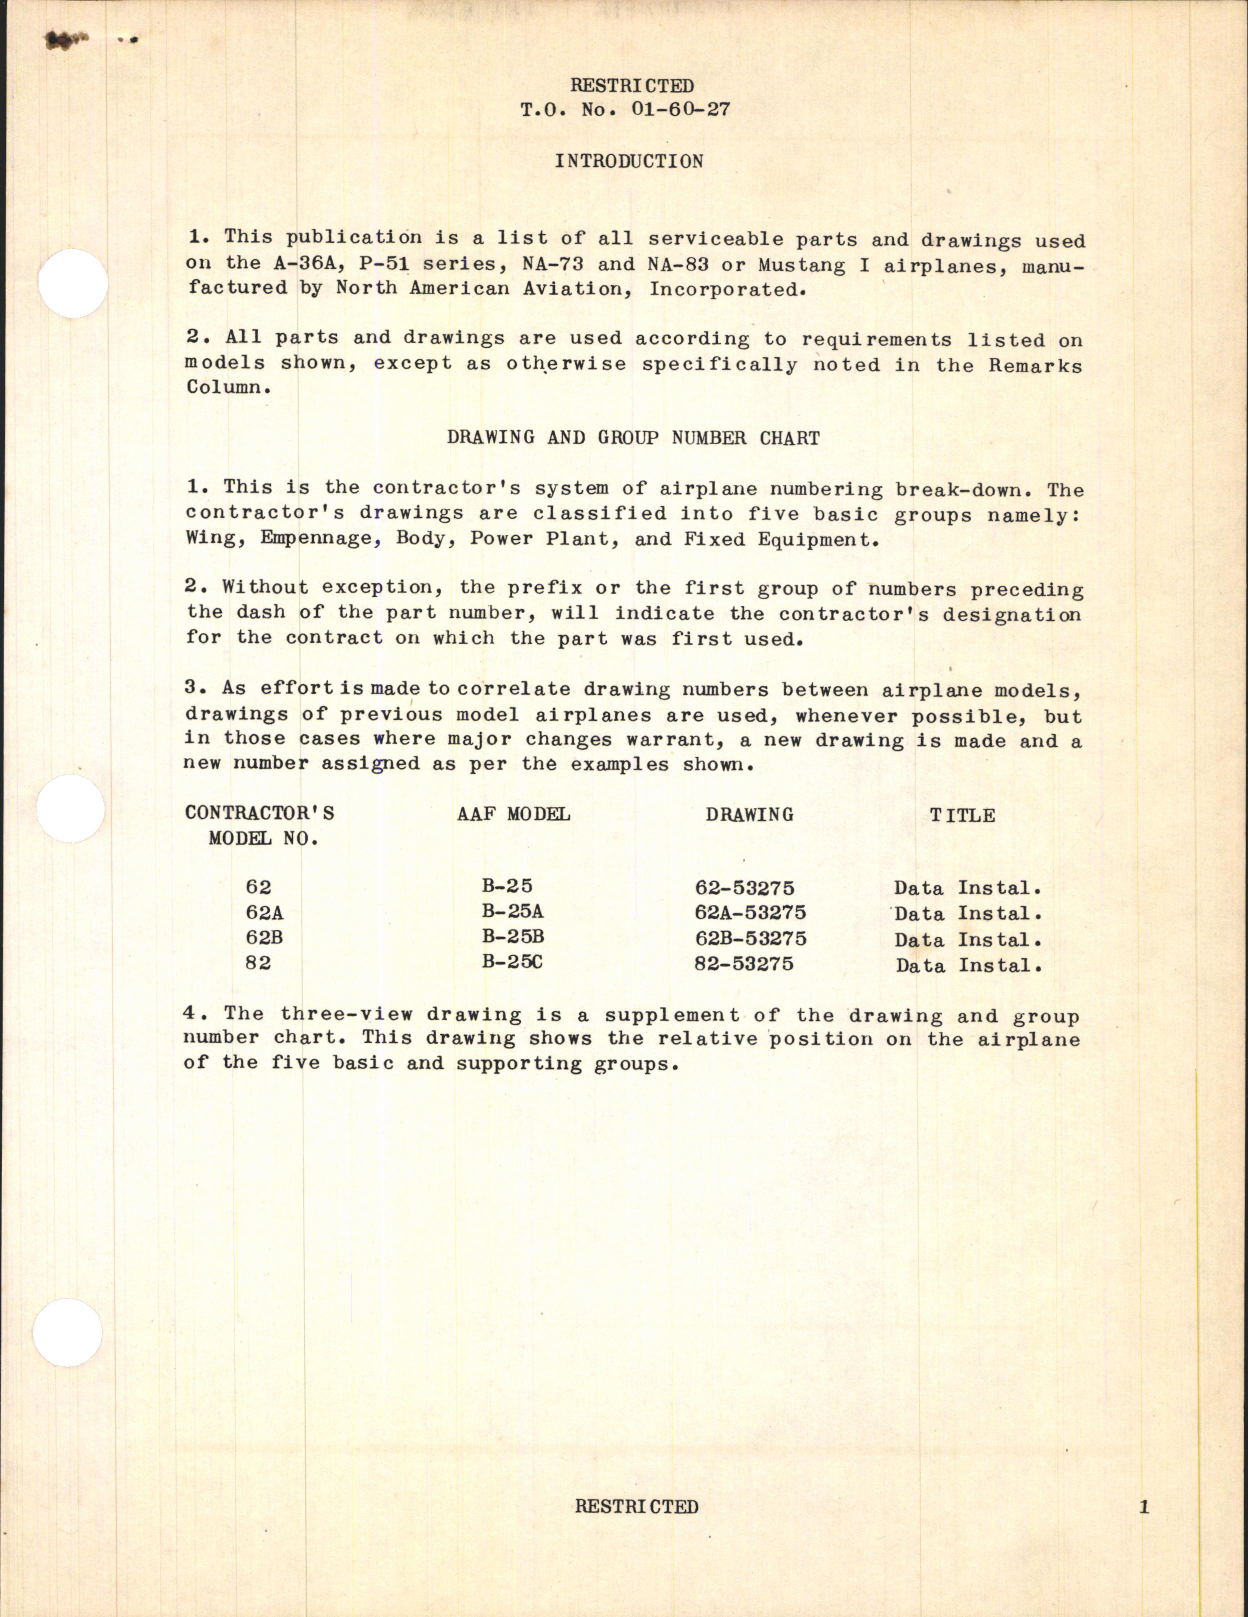 Sample page 5 from AirCorps Library document: Interchangeable Parts List for A-36A, P-51 Series, and Mustang I Airplanes